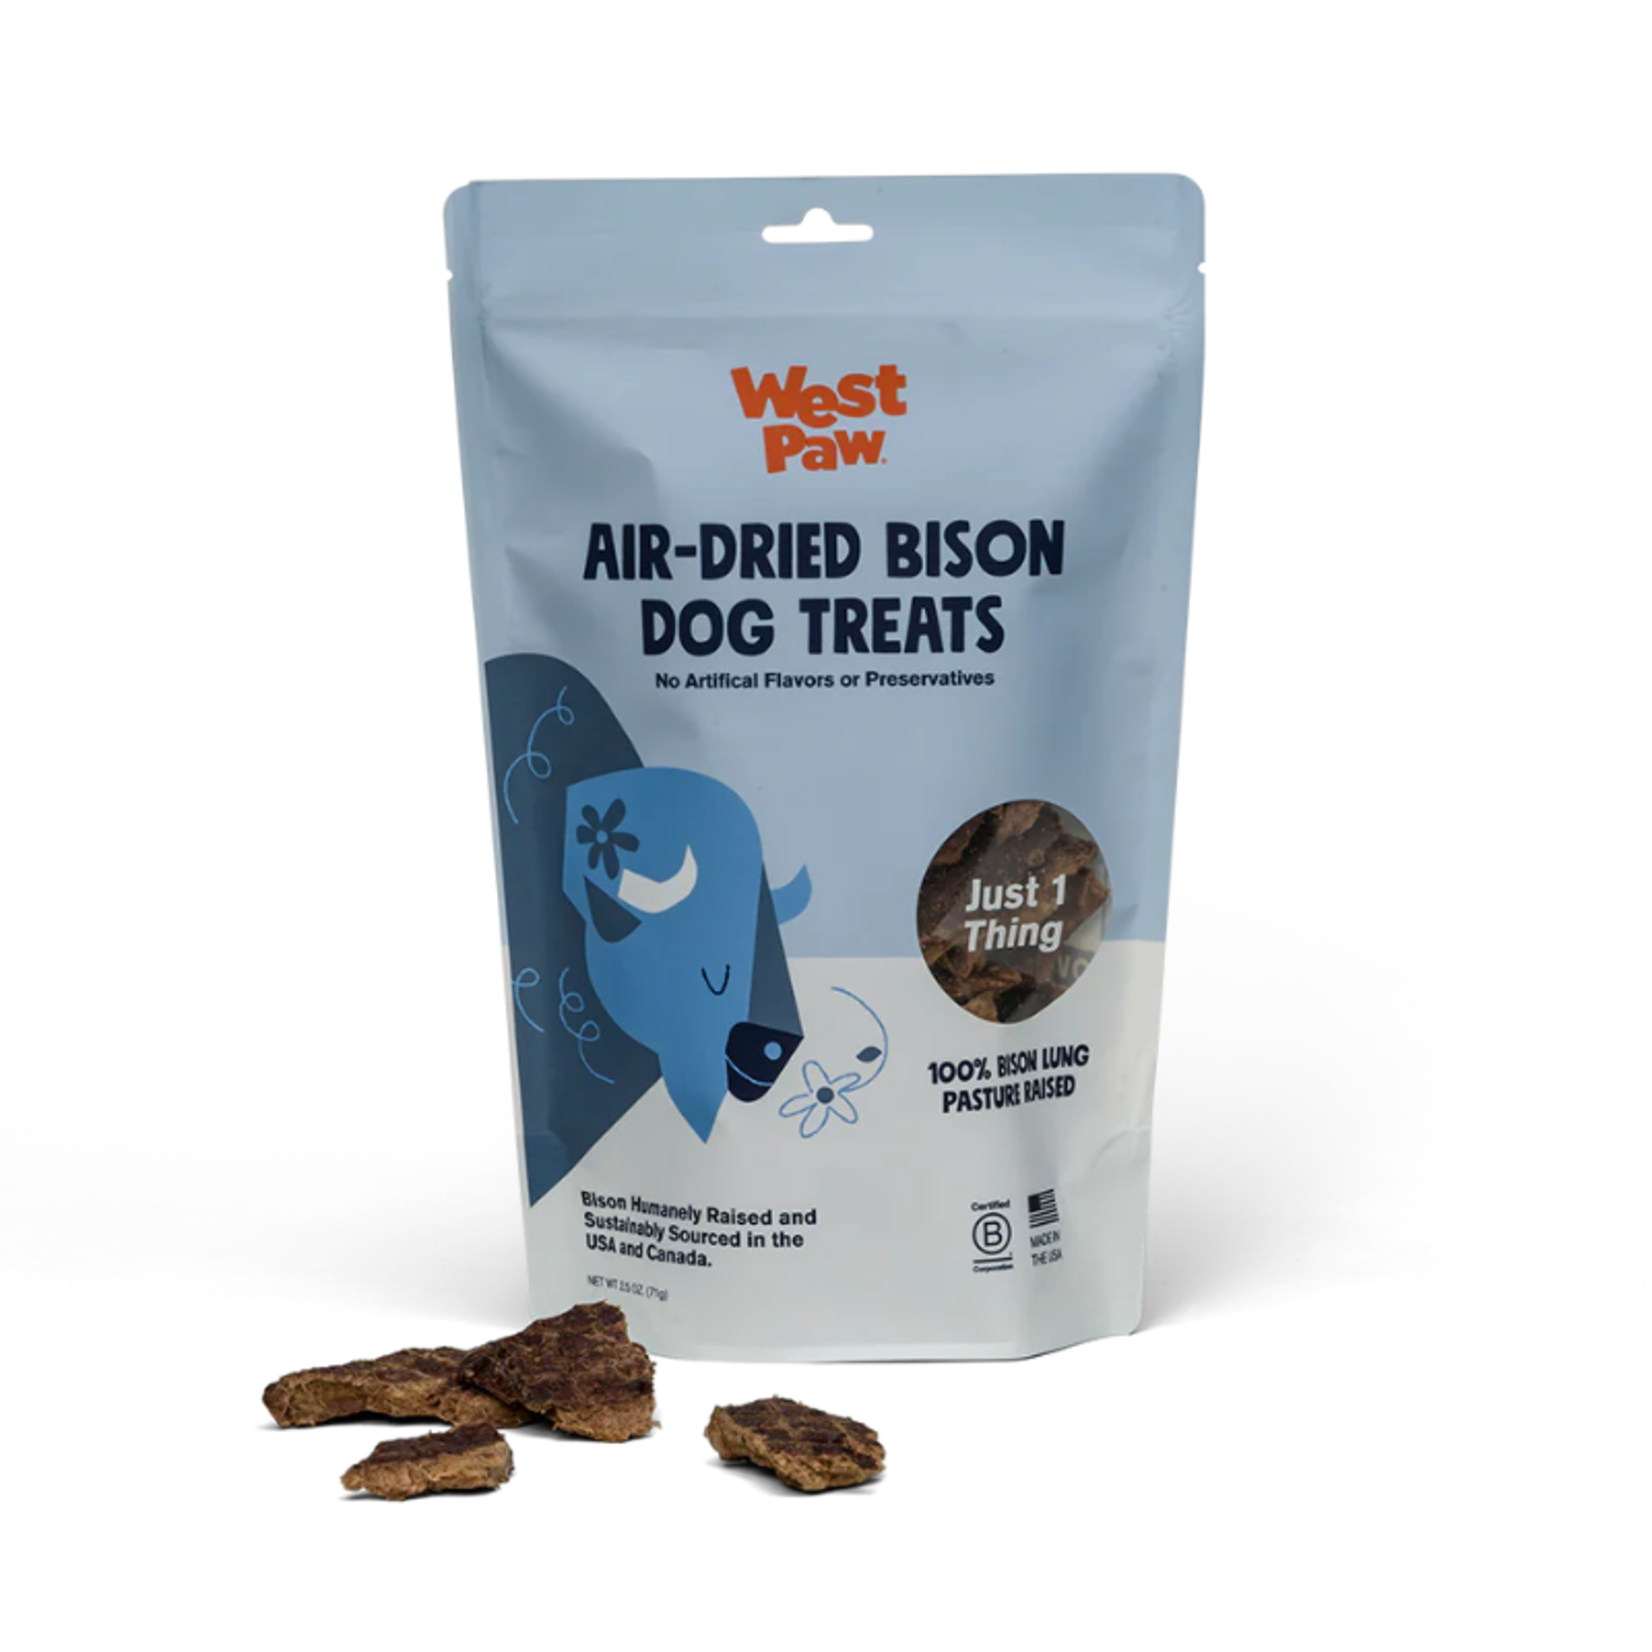 West Paw 2.5 oz. - Bison Lung - Air-Dried Treats -  West Paw